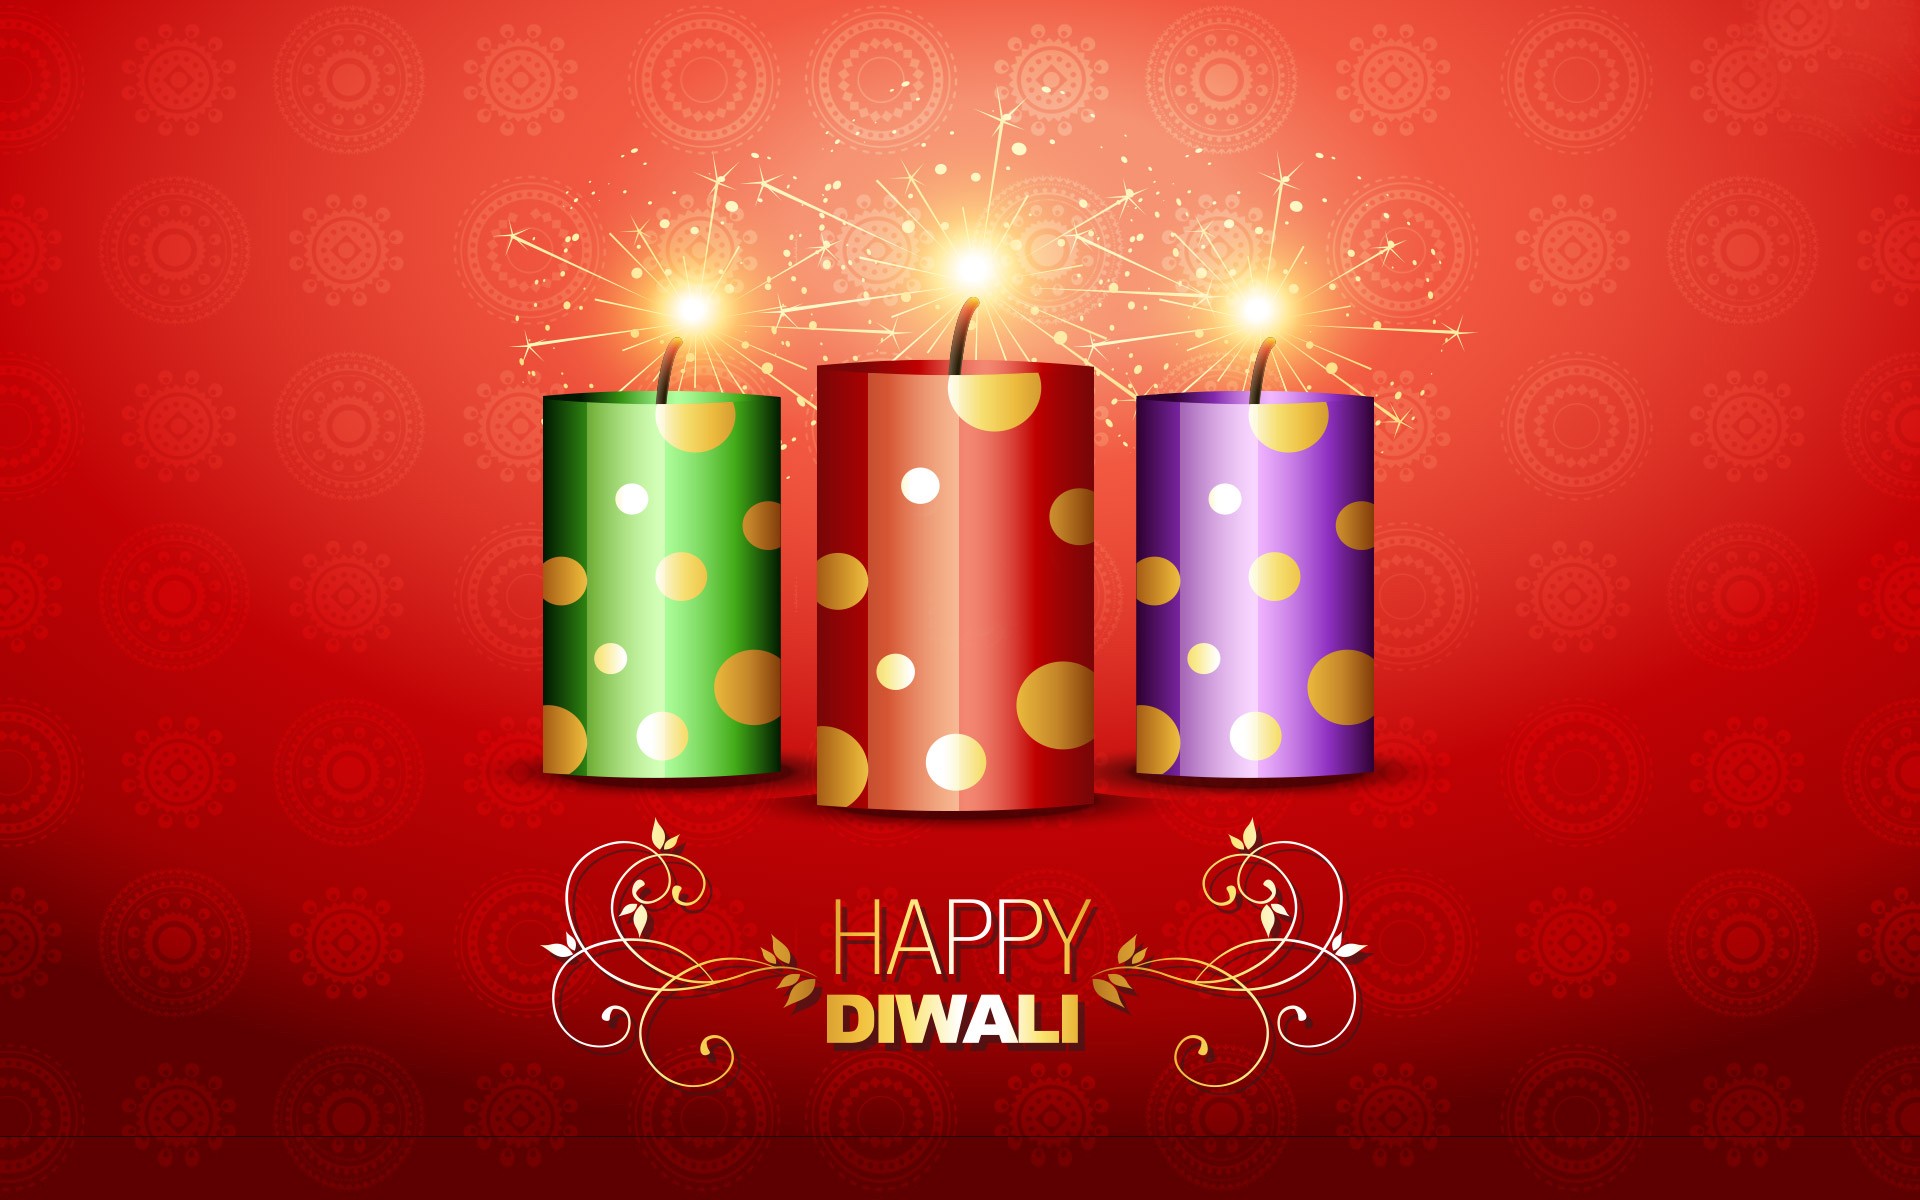 Happy Diwali Hd Images, Wallpapers, Picture & Photos - Bombs Of Diwali - HD Wallpaper 